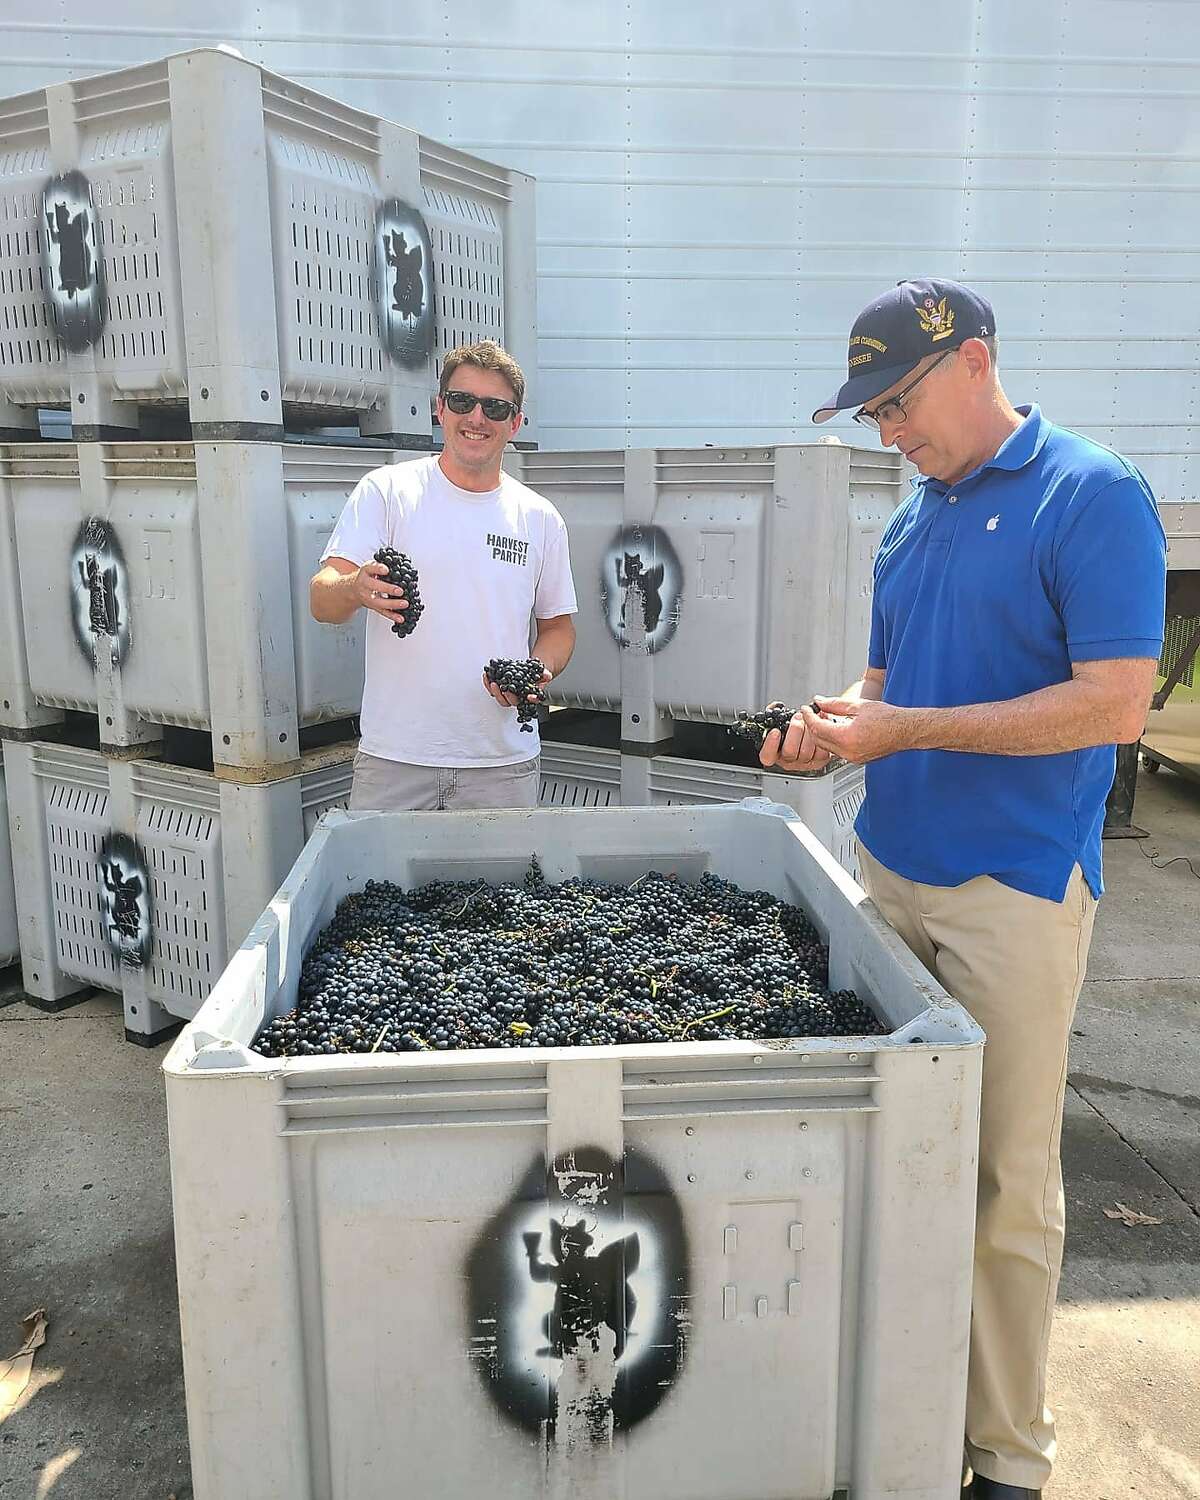 Arrington Vineyards of Nashville, Tennessee grows hybrid grapes and also sources grapes from the West Coast.